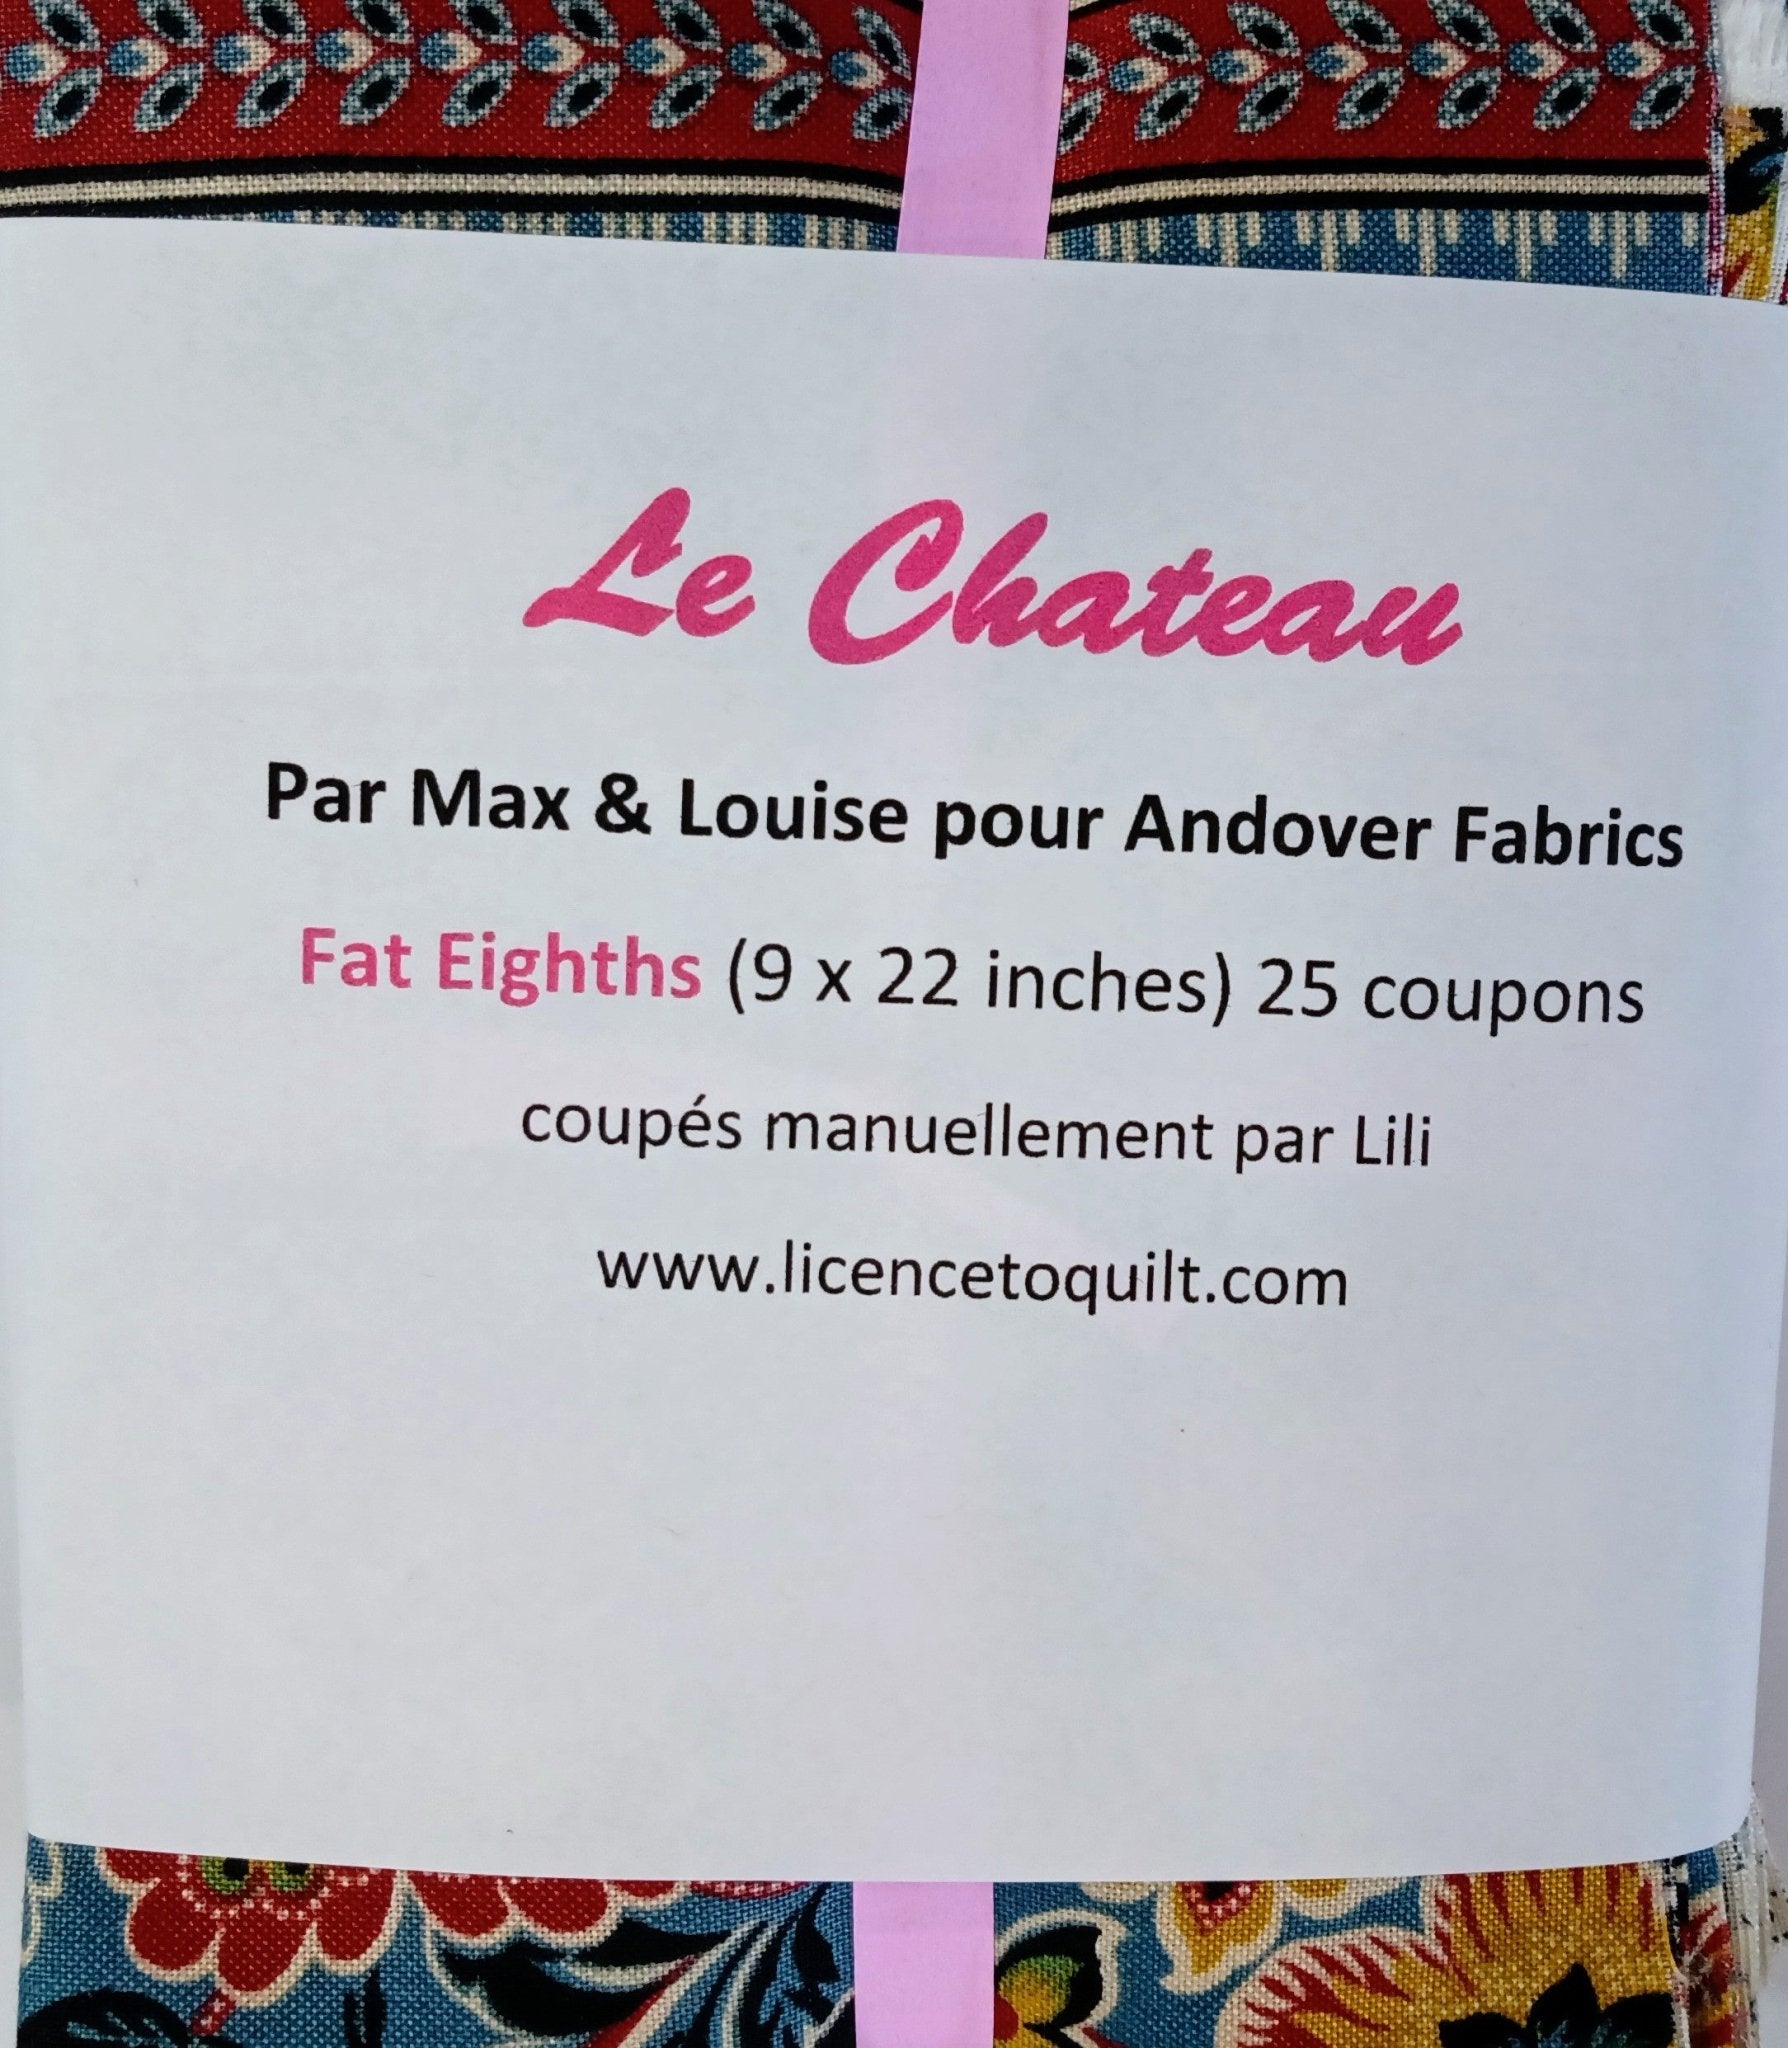 Le Chateau - Fat Eighths (25) - Licence To Quilt